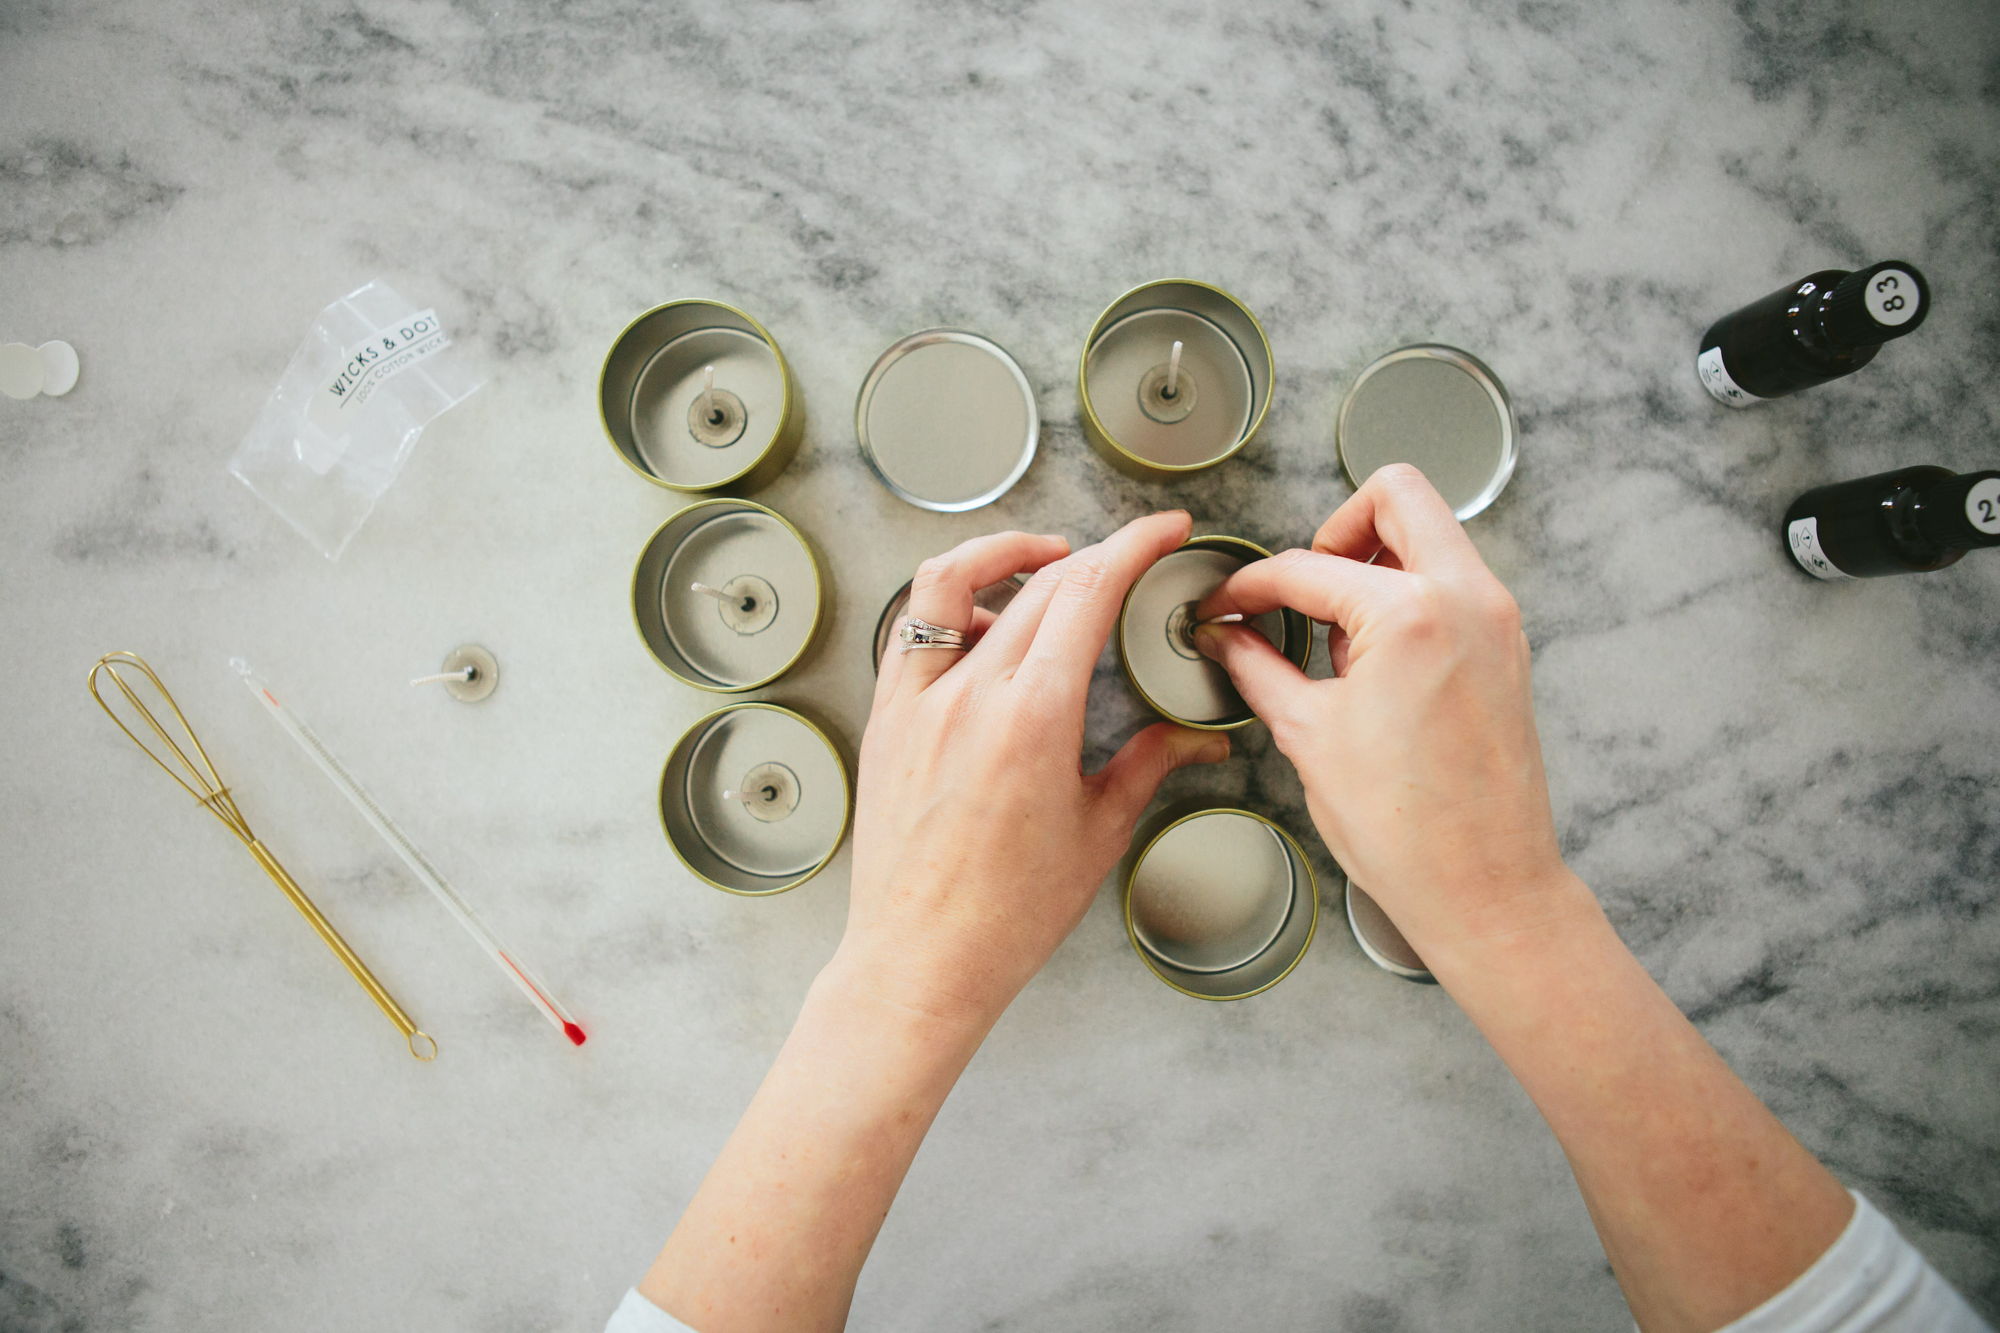 Introducing: The Candle-Making Kit – Candlefish